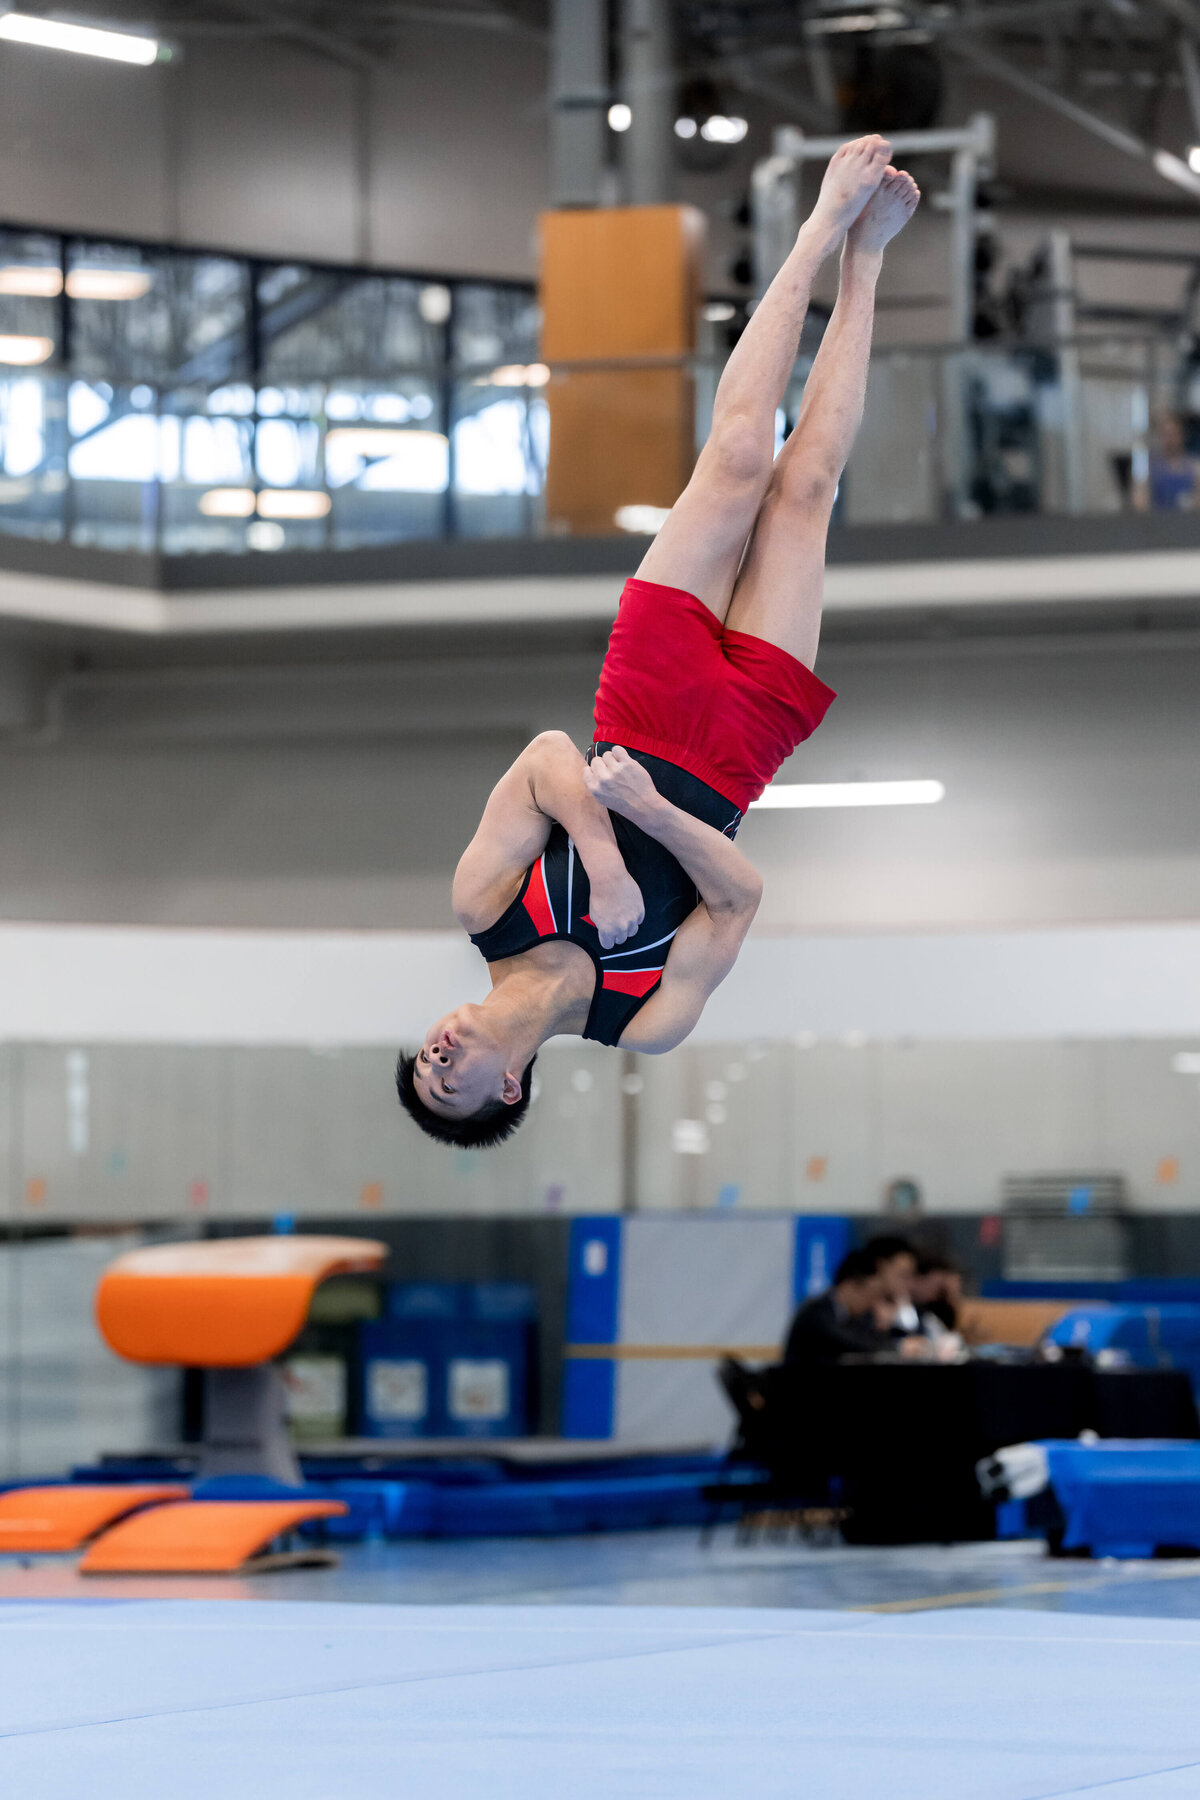 Photo by Luke O'Geil taken at the 2023 inaugural Grizzly Classic men's artistic gymnastics competitionA1_02968